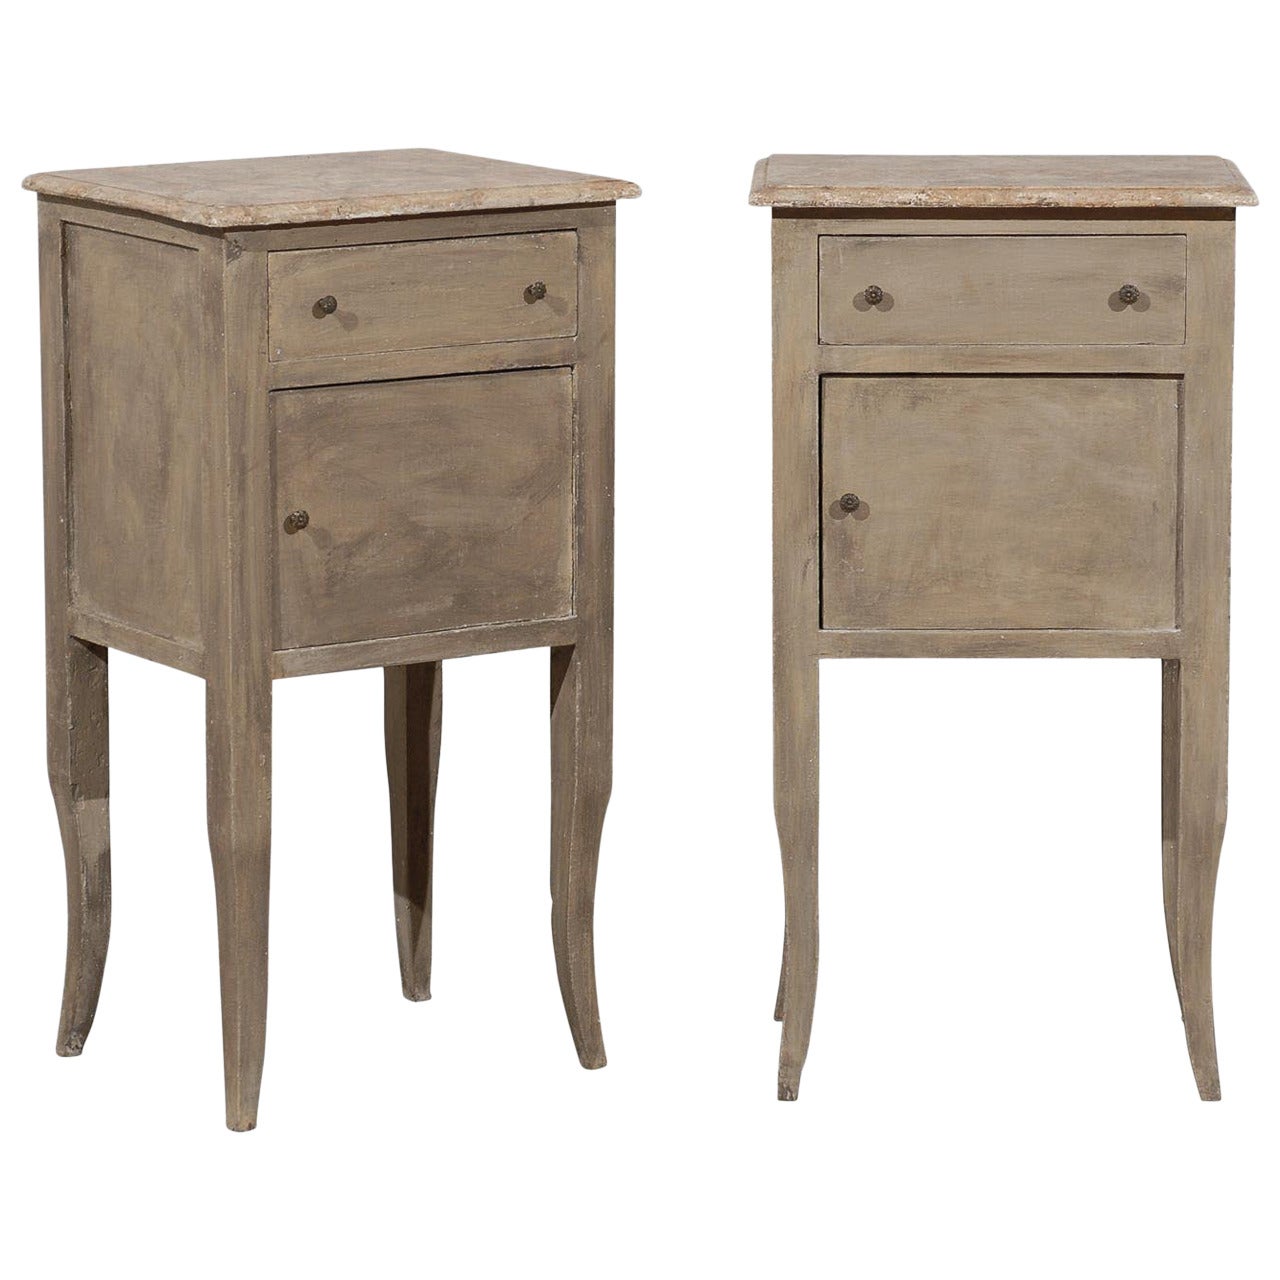 Pair of Italian Mid-20th Century Nightstand Tables or Chests